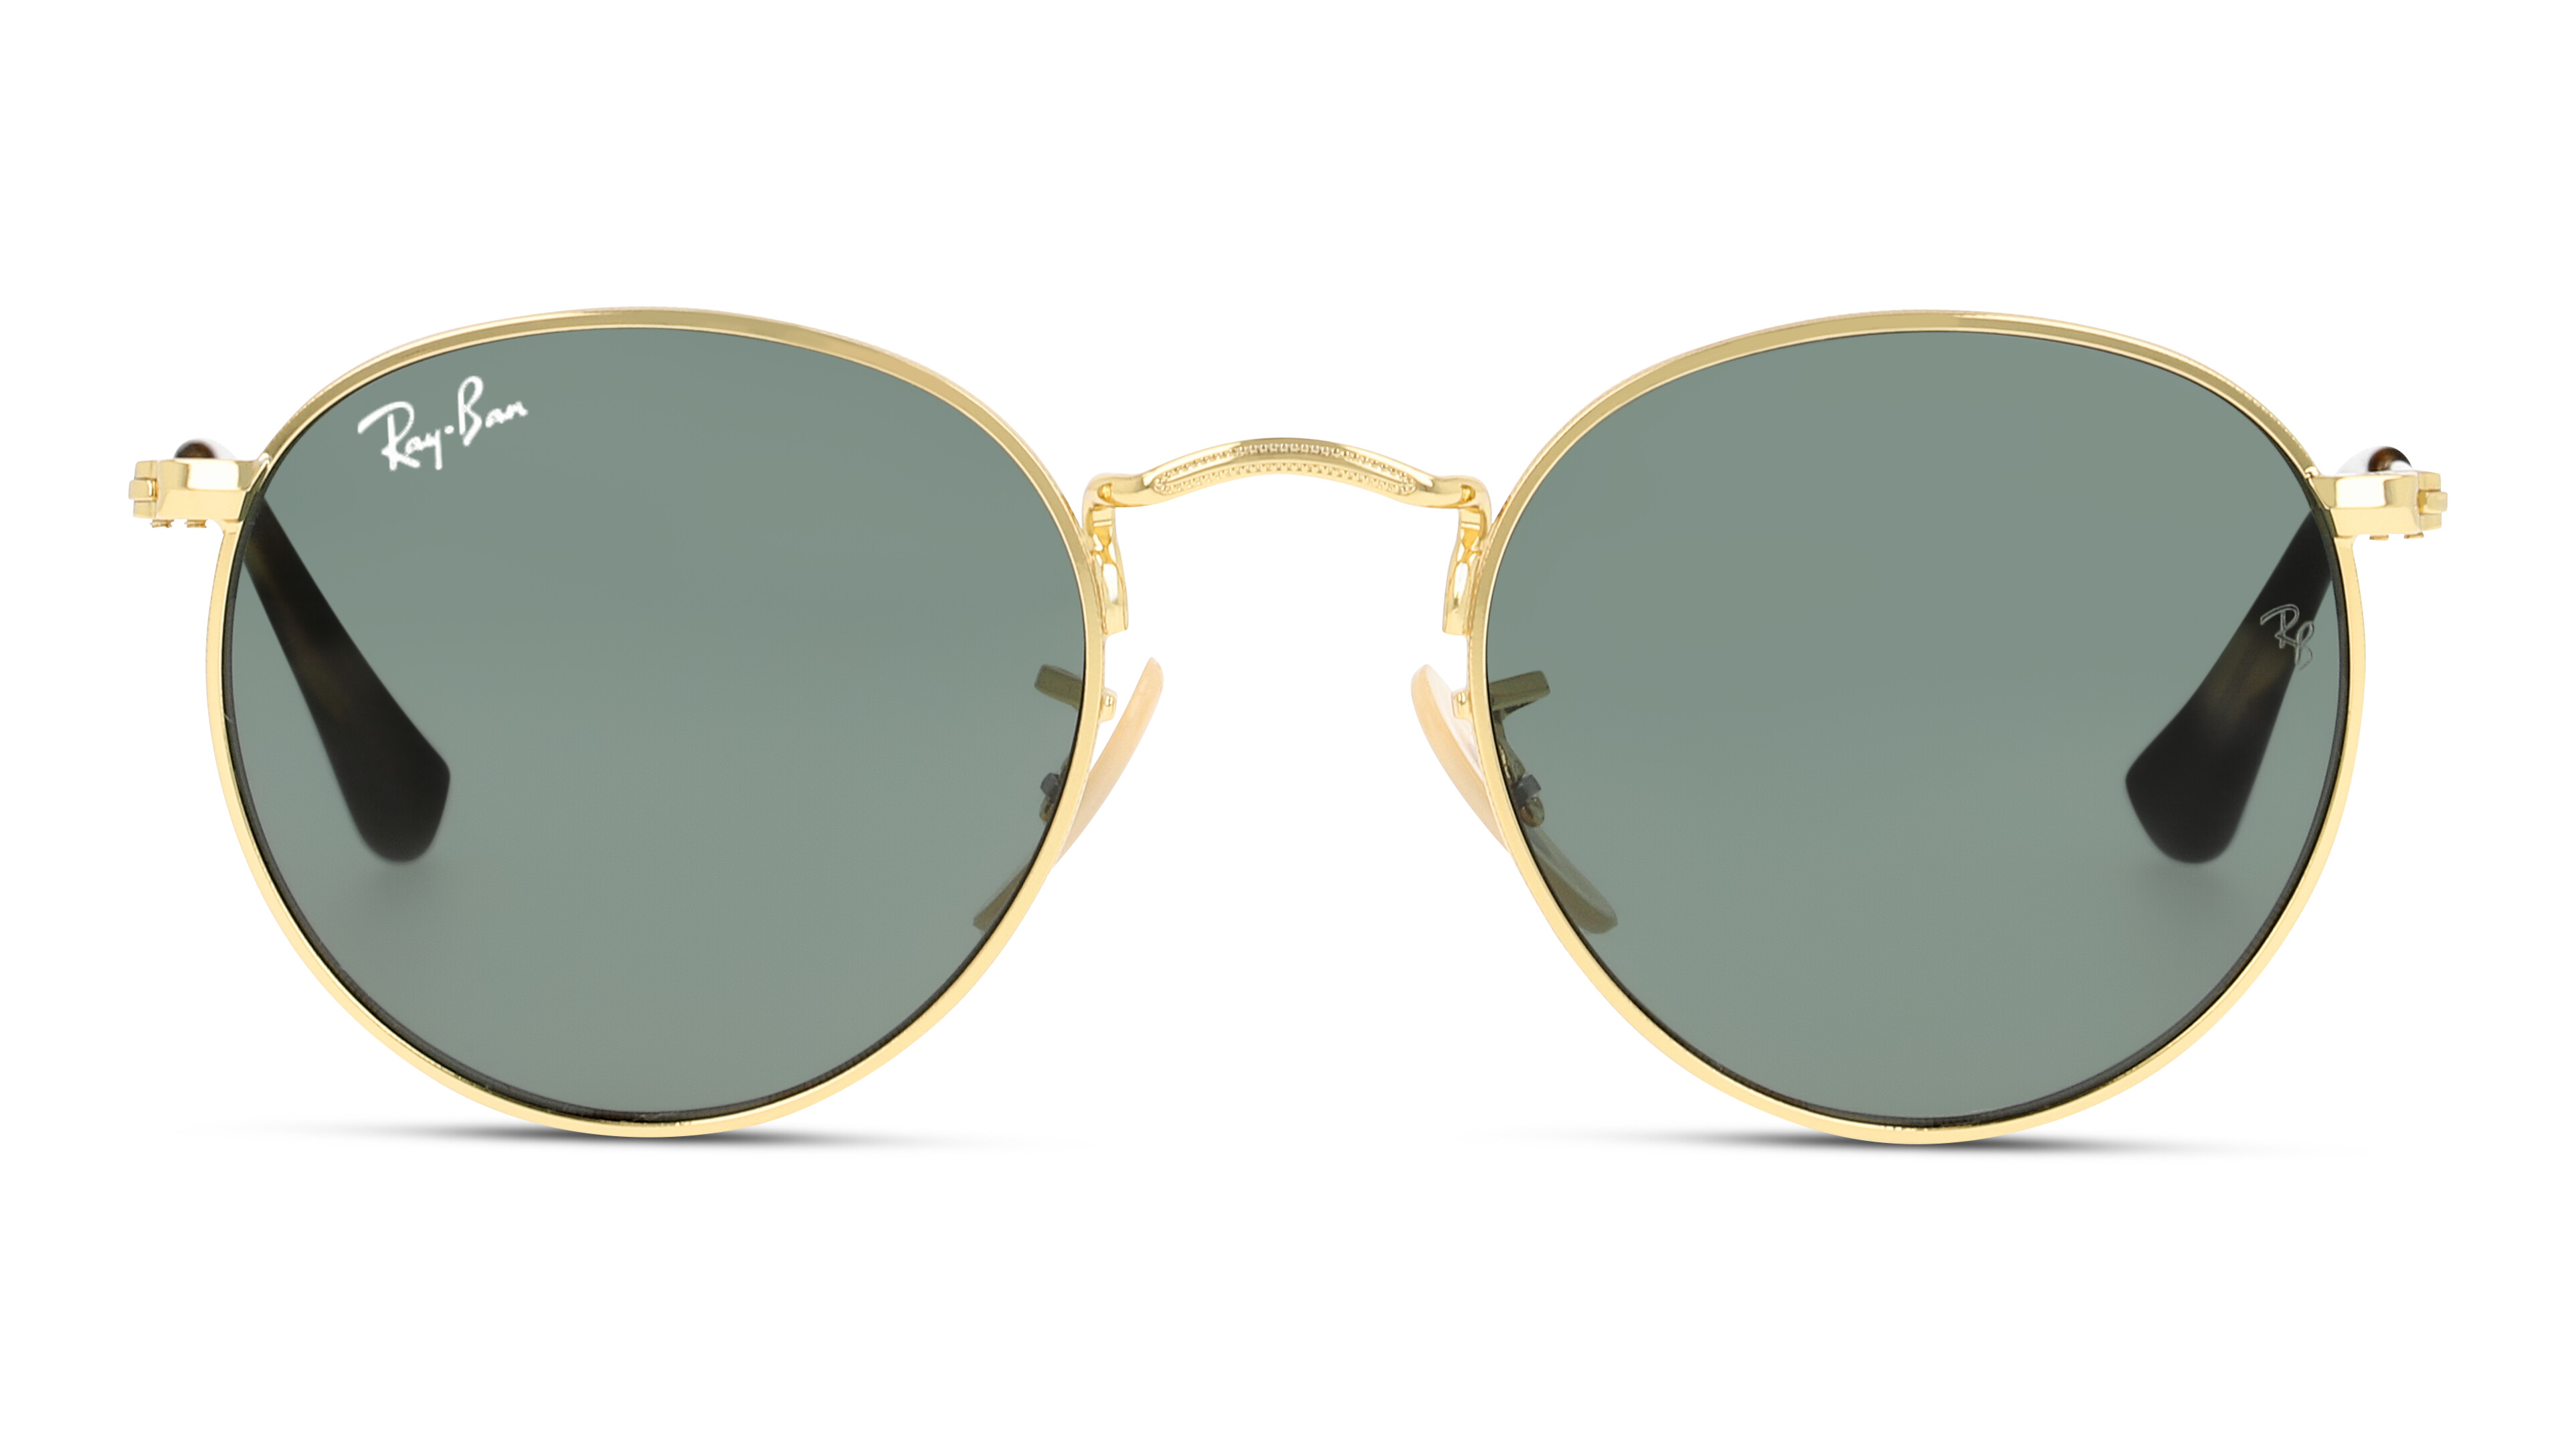 [products.image.front] Ray-Ban JUNIOR ROUND 0RJ9547S 223/71 Sonnenbrille